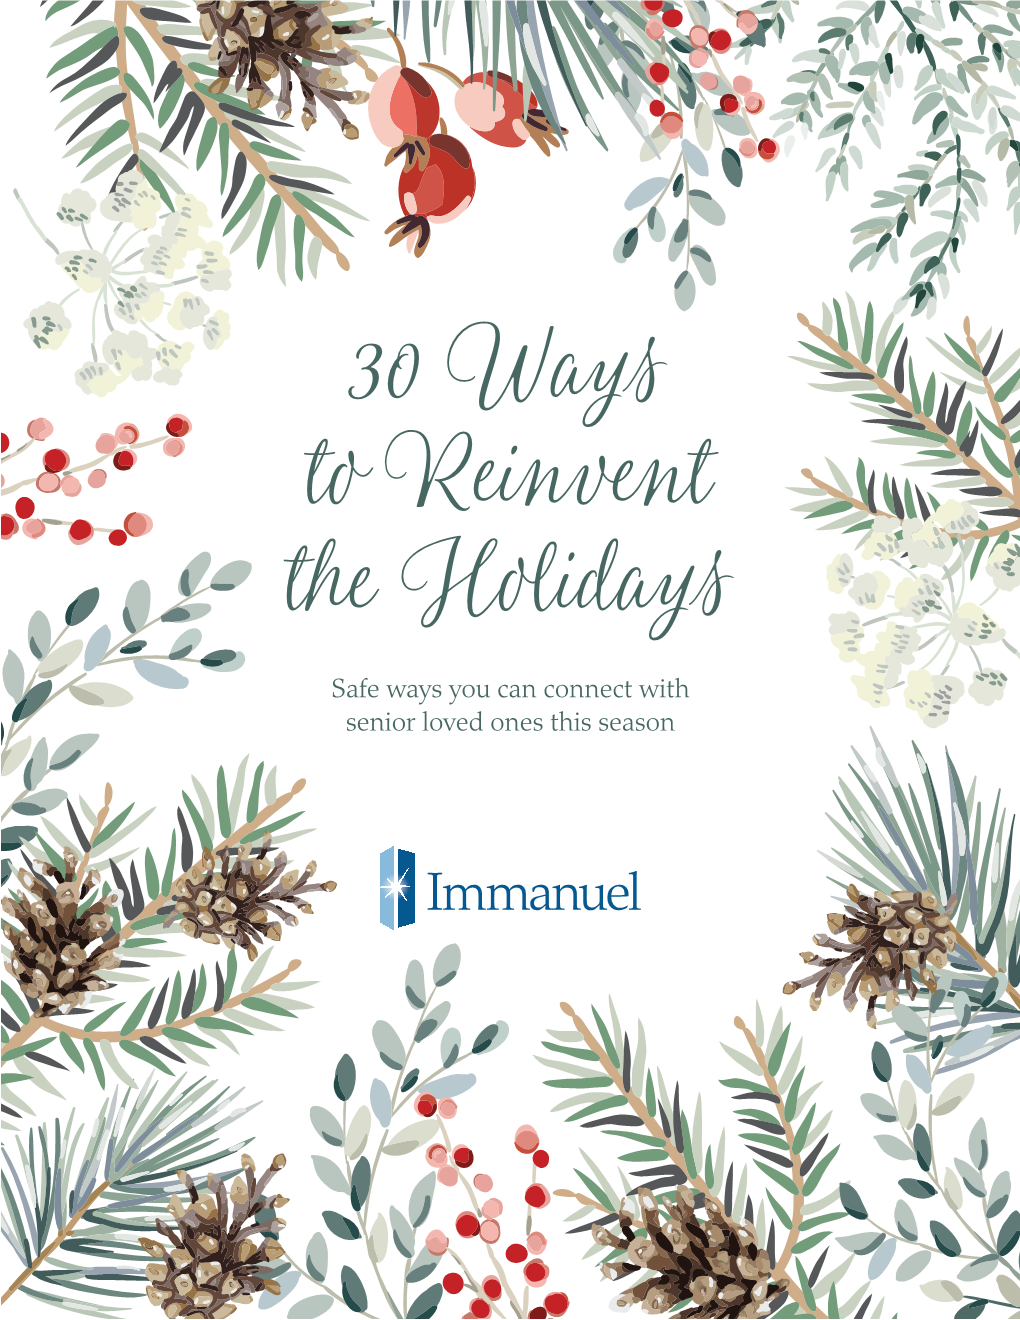 30 Ways to Reinvent the Holidays